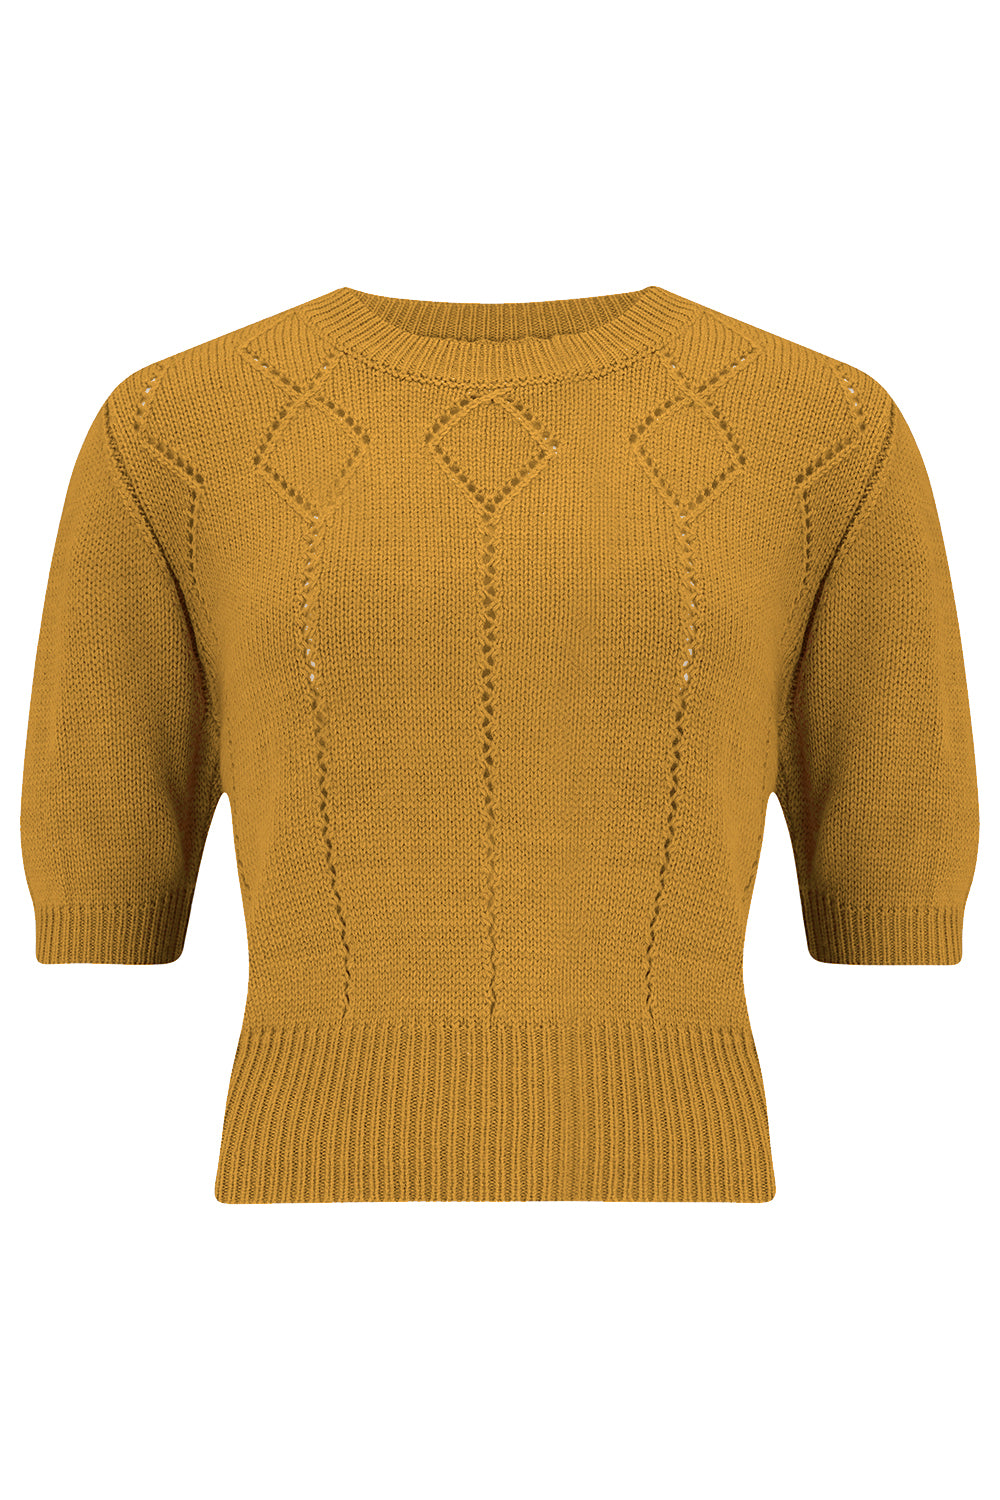 The "Frances" Short Sleeve Pullover Jumper in Light Mustard, Classic 1940s & 50s Vintage Style